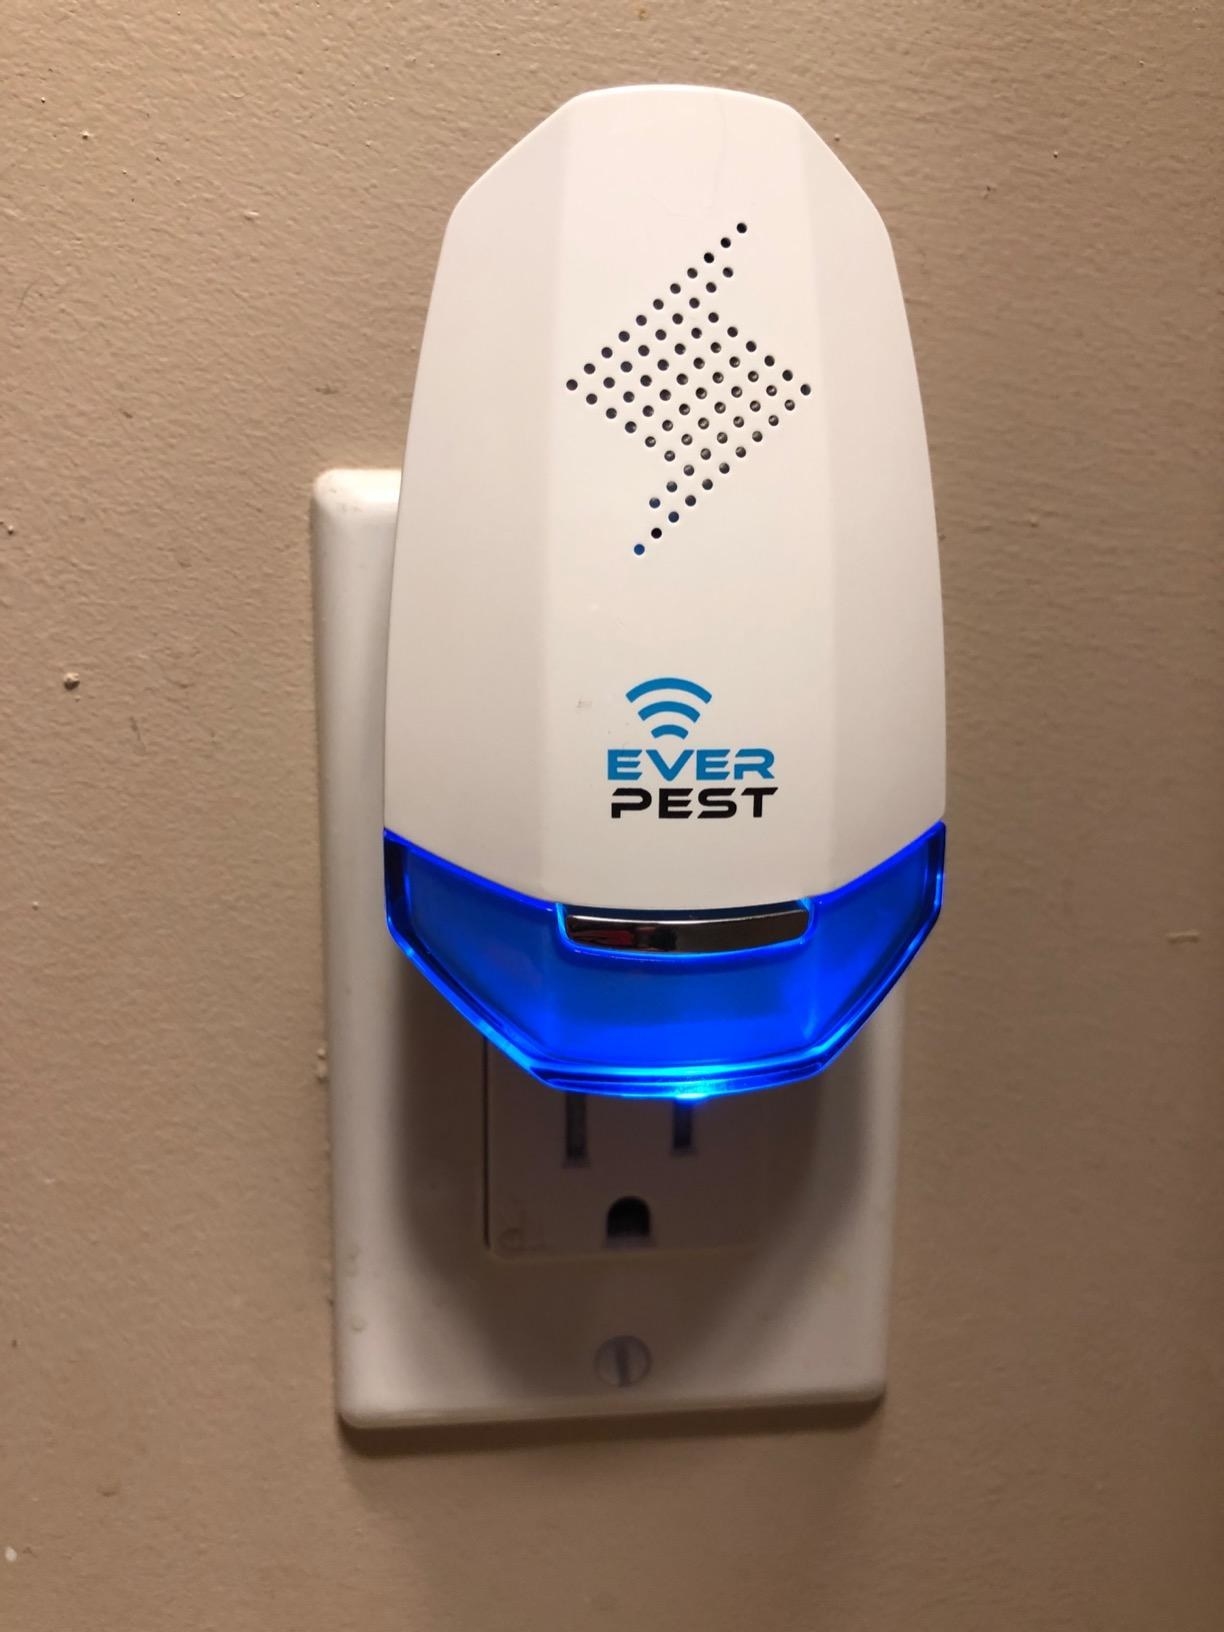 Reviewer image of the pest repeller plugged into a wall outlet